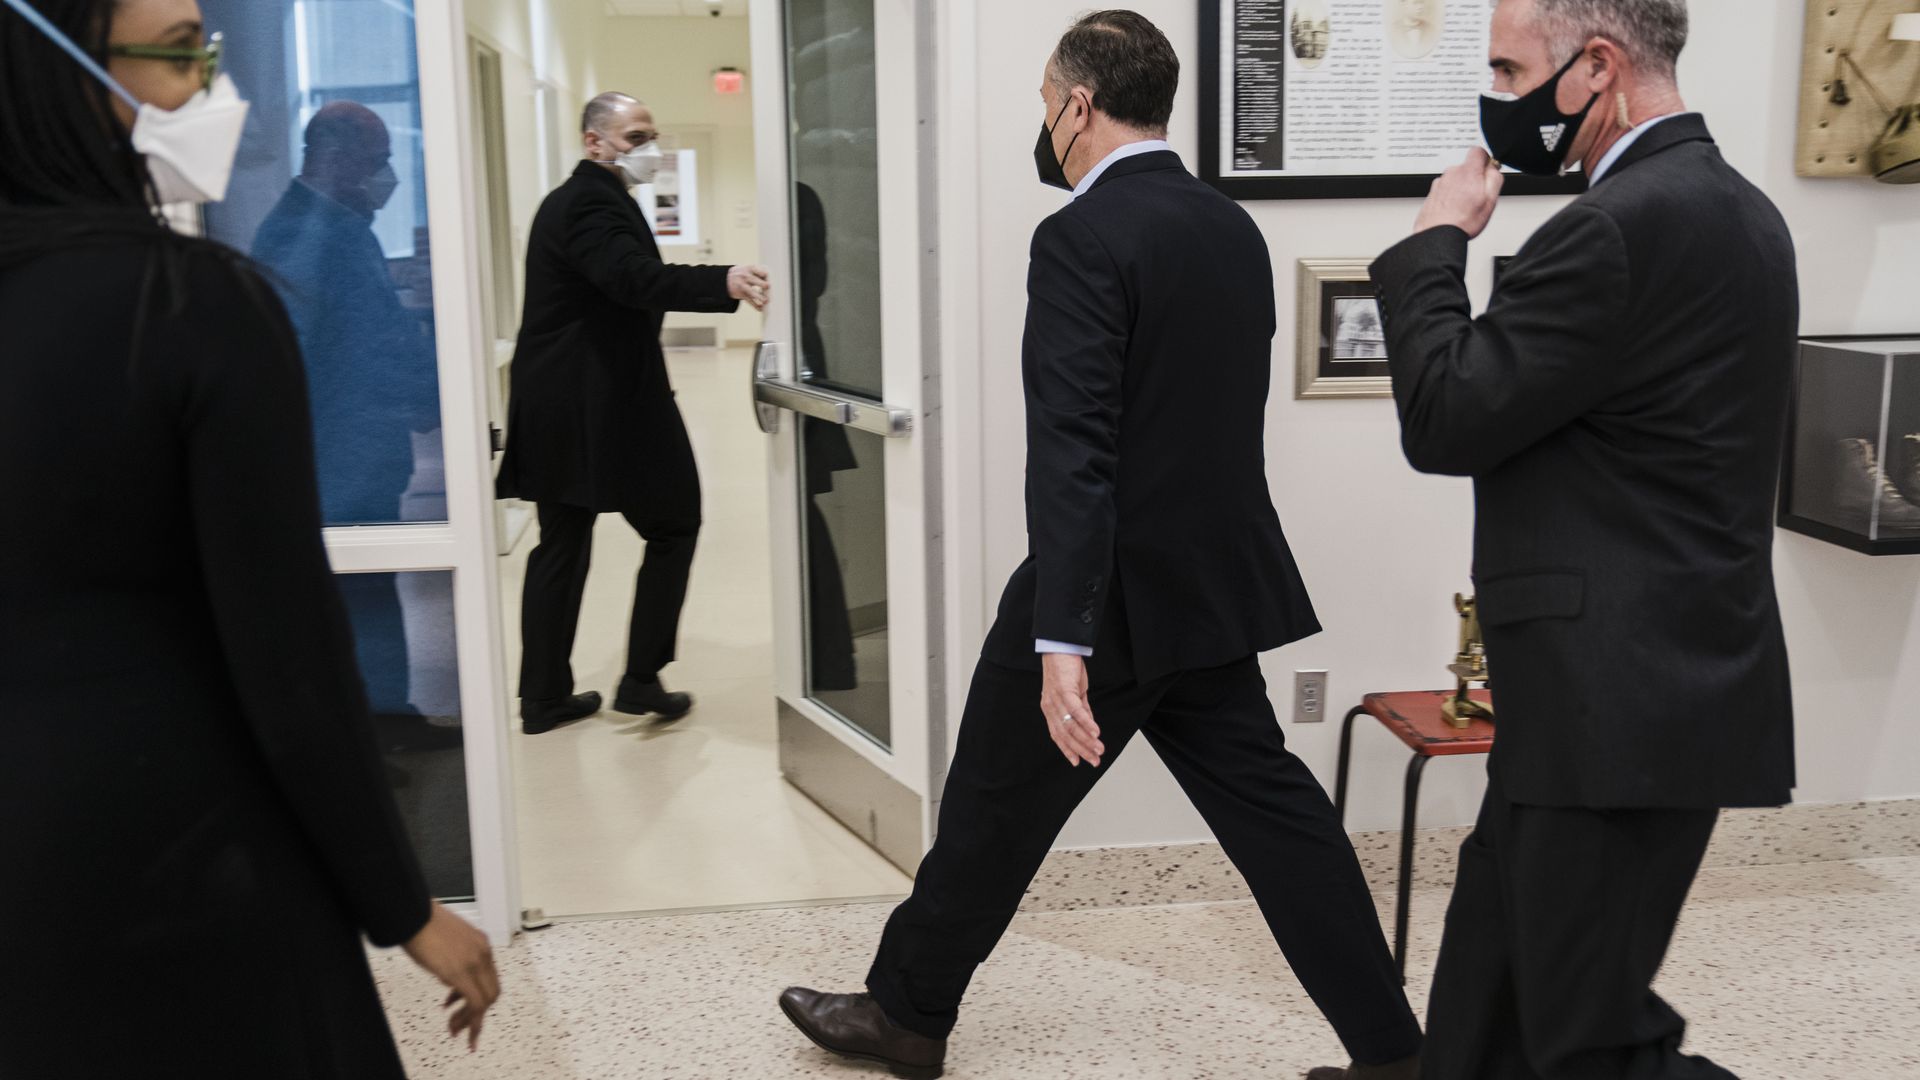 Secret Service agents are seen leading Second Gentleman Doug Emhoff out of a Washington school after a bomb threat.